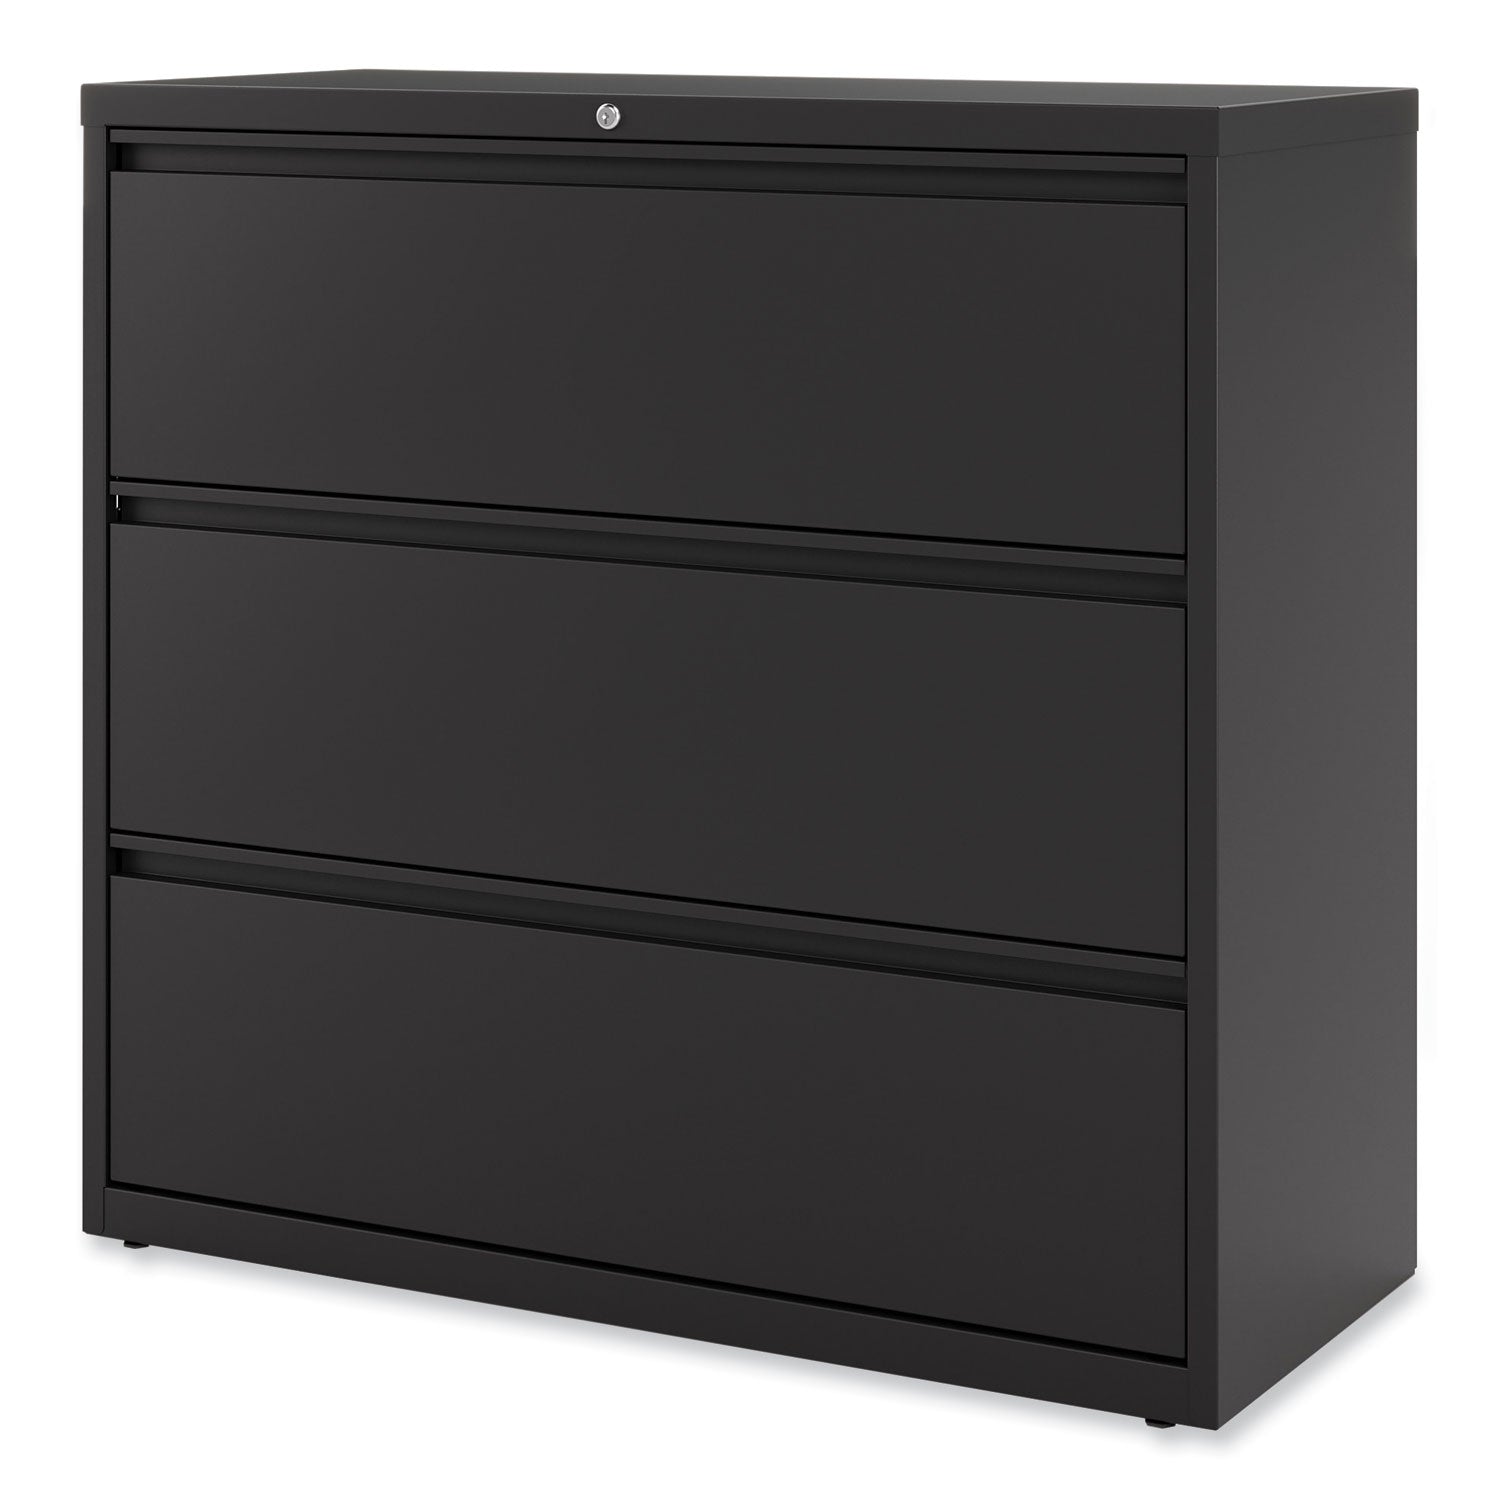 lateral-file-3-legal-letter-a4-a5-size-file-drawers-black-42-x-1863-x-4025_alehlf4241bl - 8